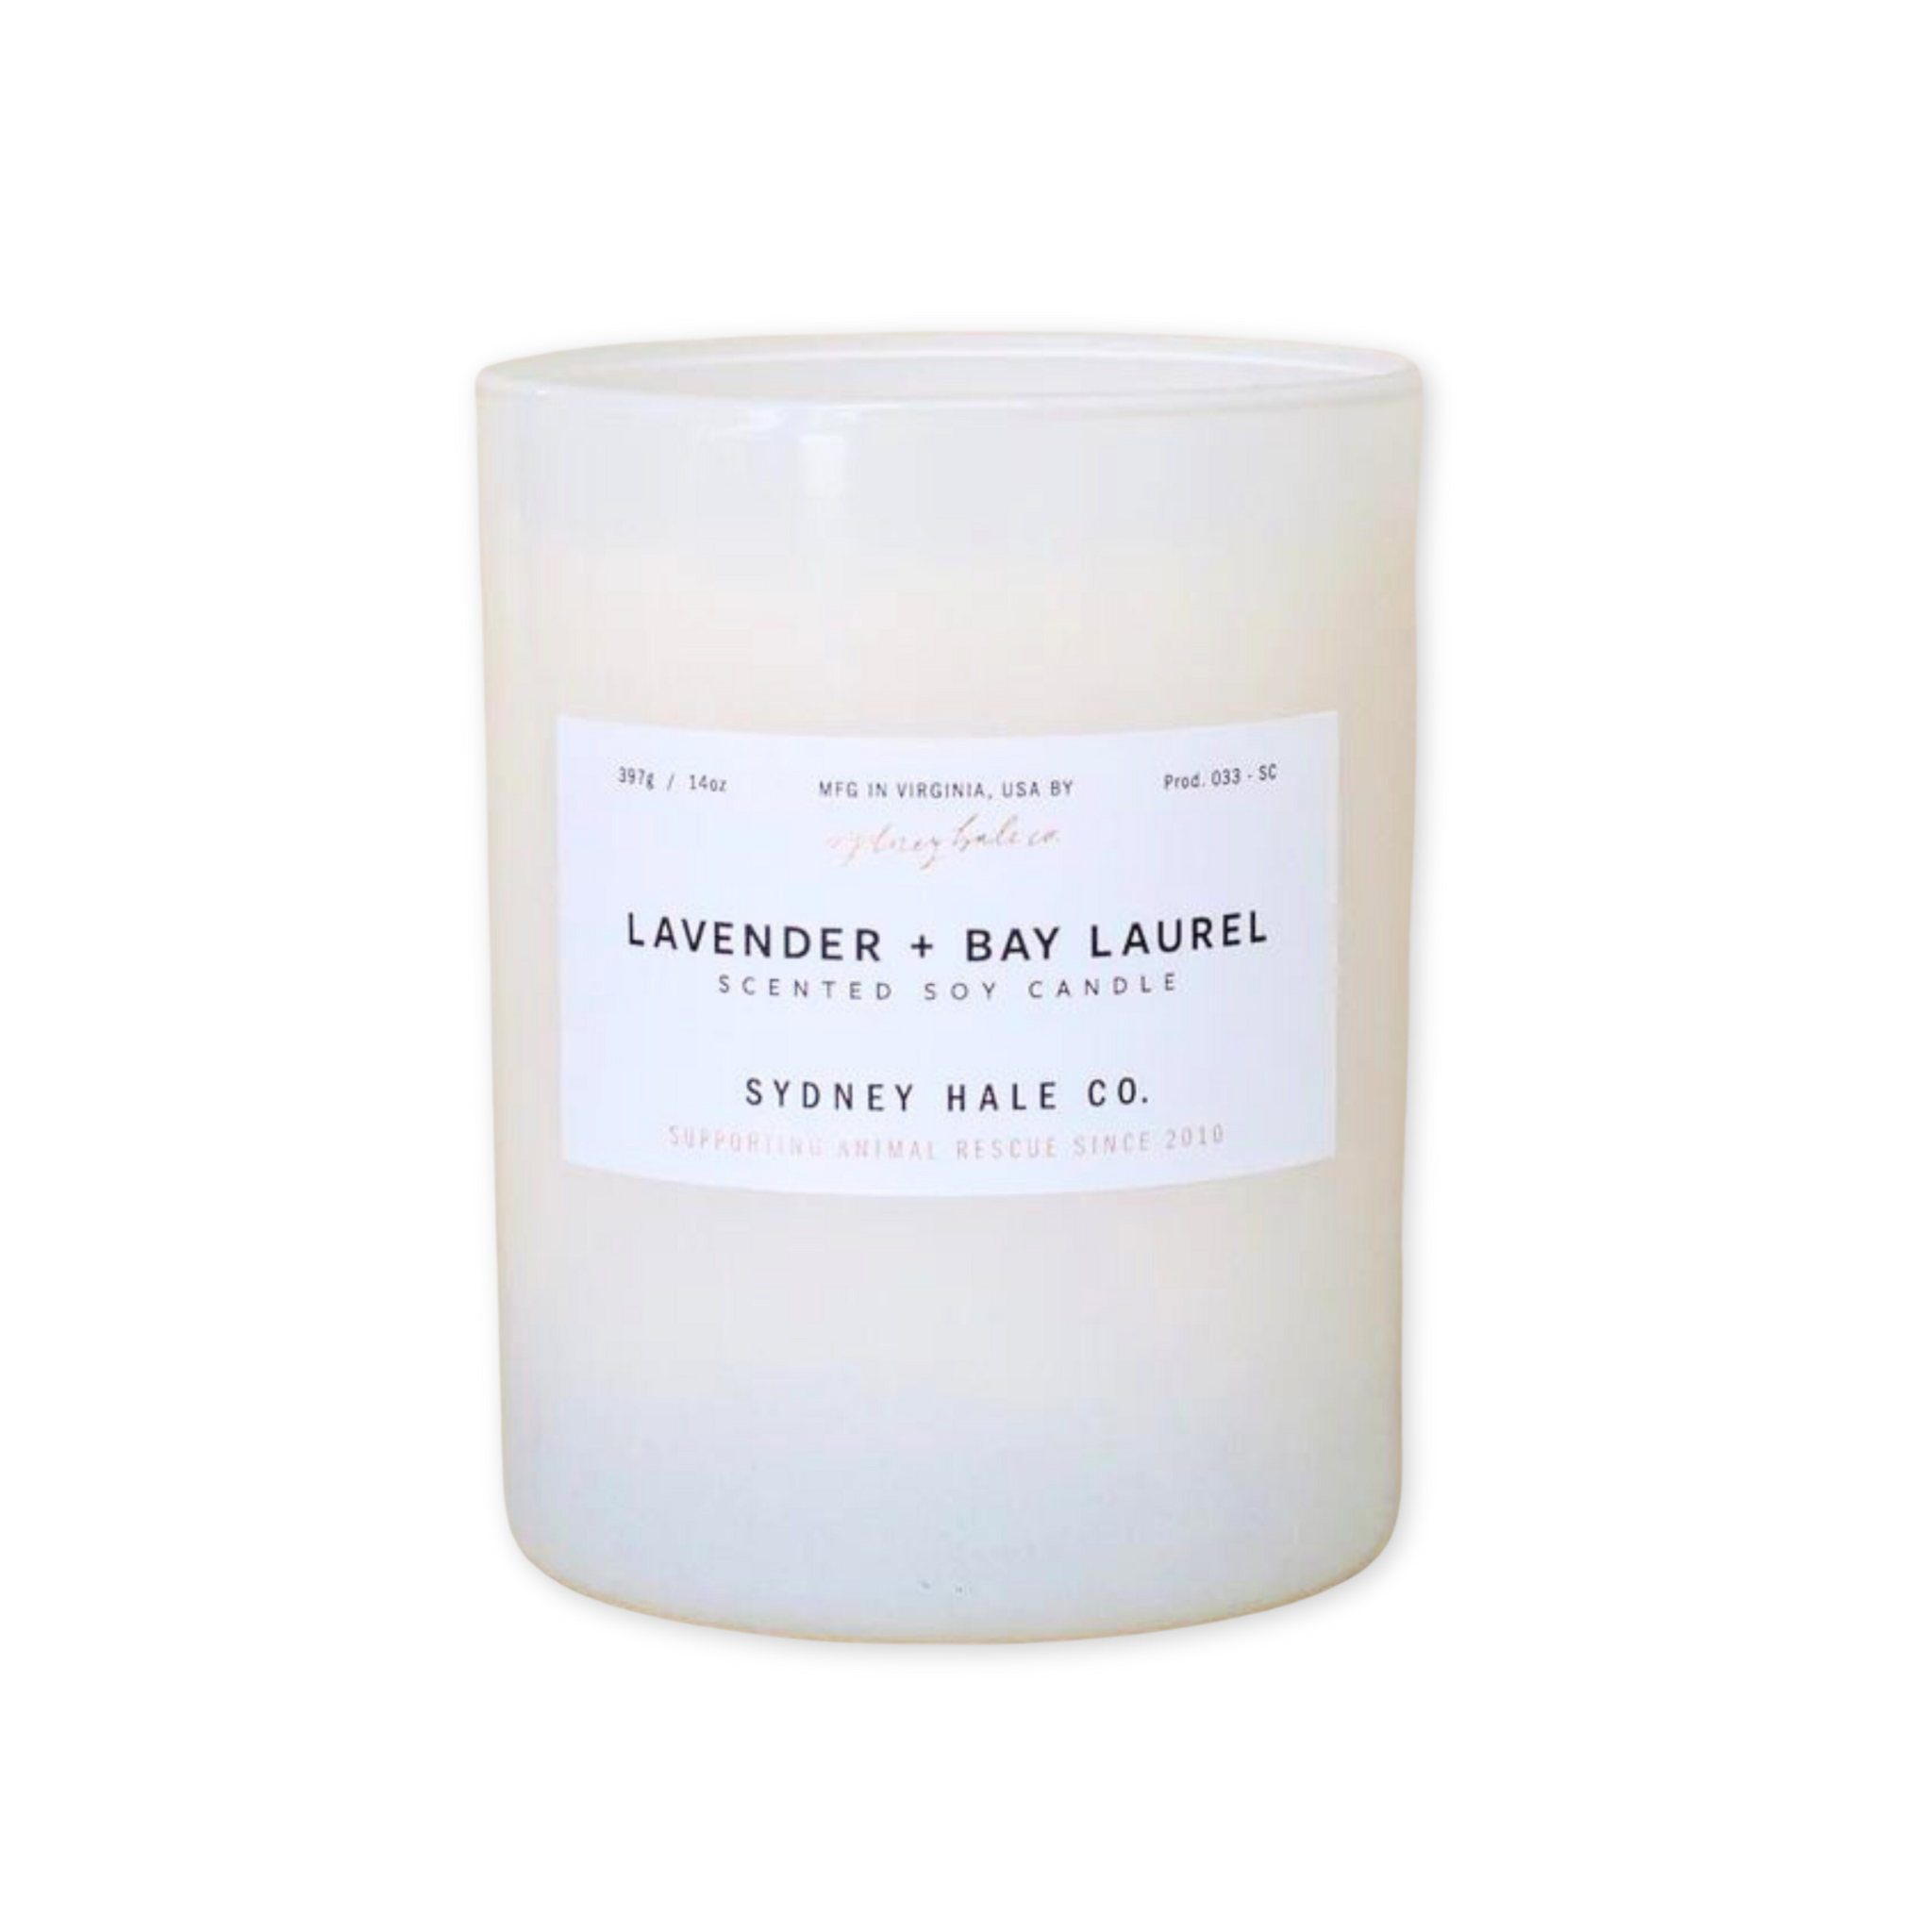 lavender and bay laurel scented candle